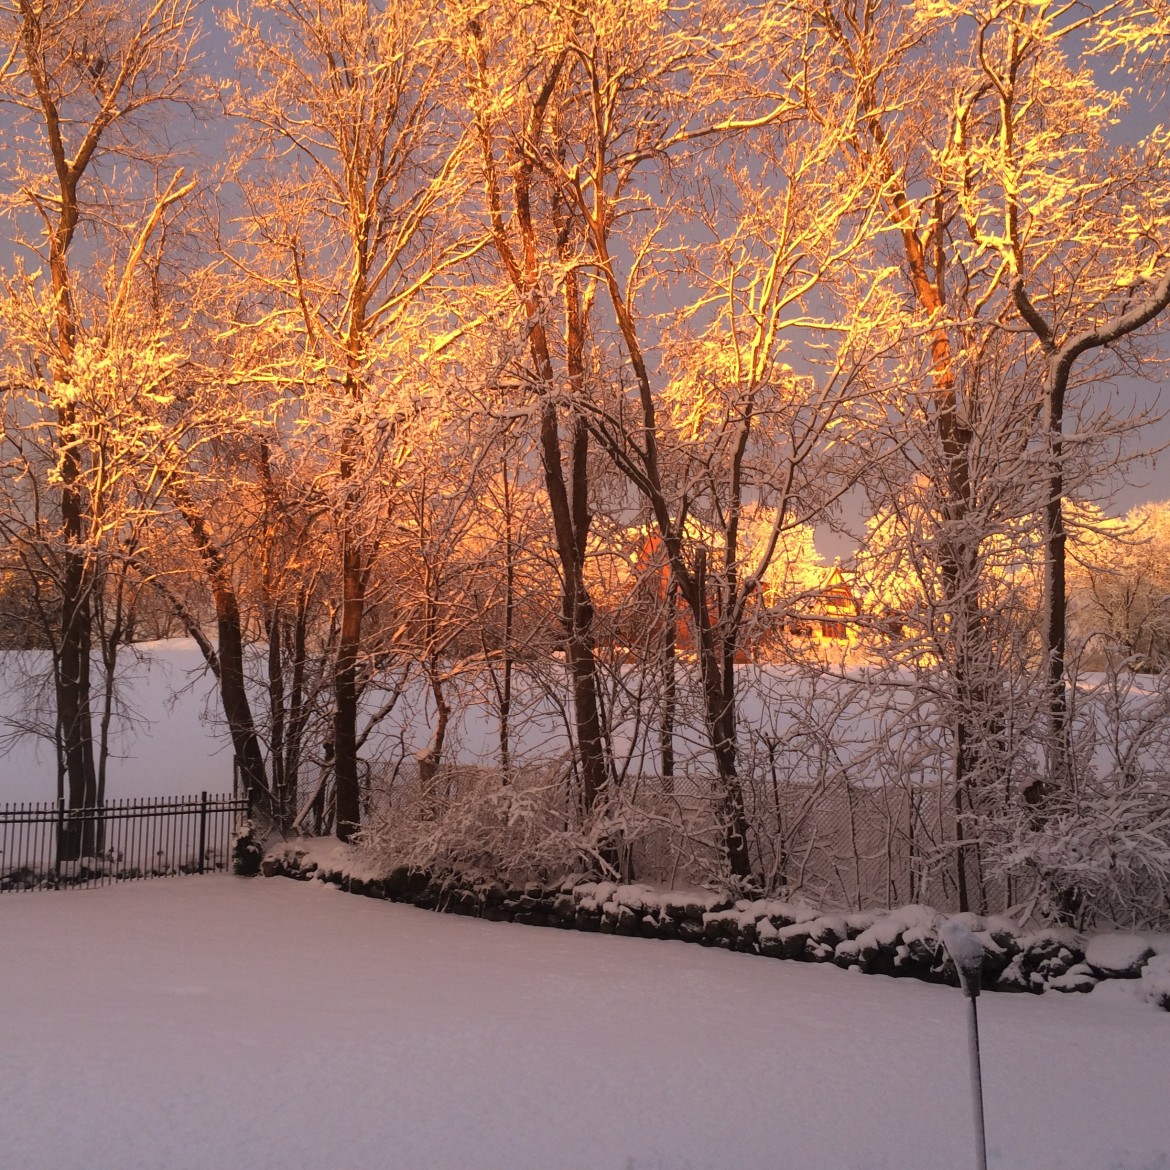 The sun sets after a snowy day in Watertown.